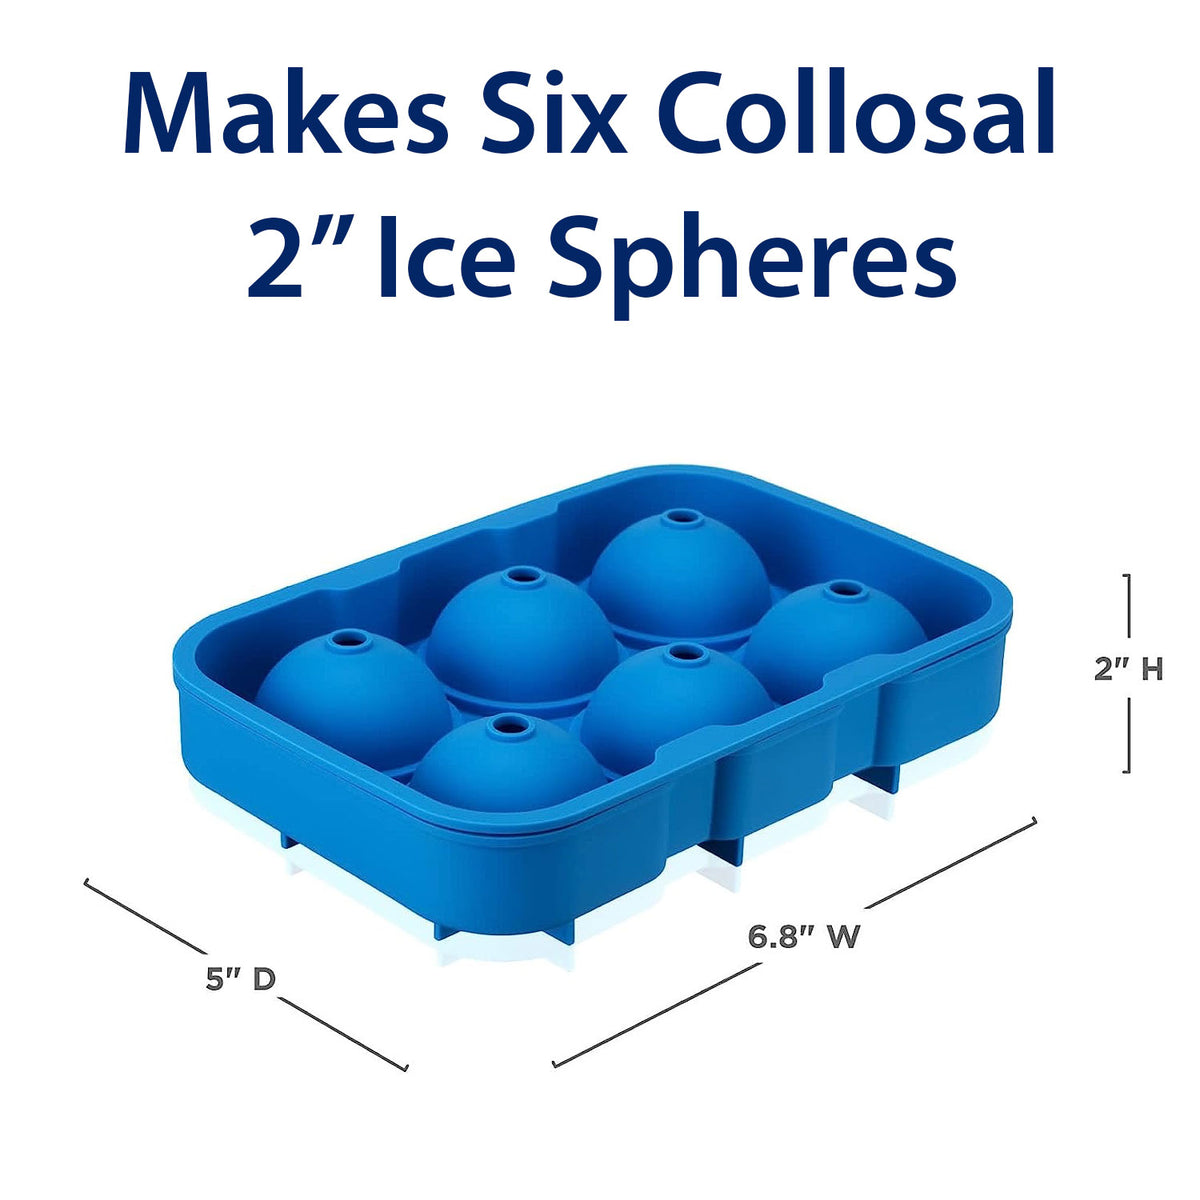 2 Silicone Ice Sphere Mold (makes 6 spheres)